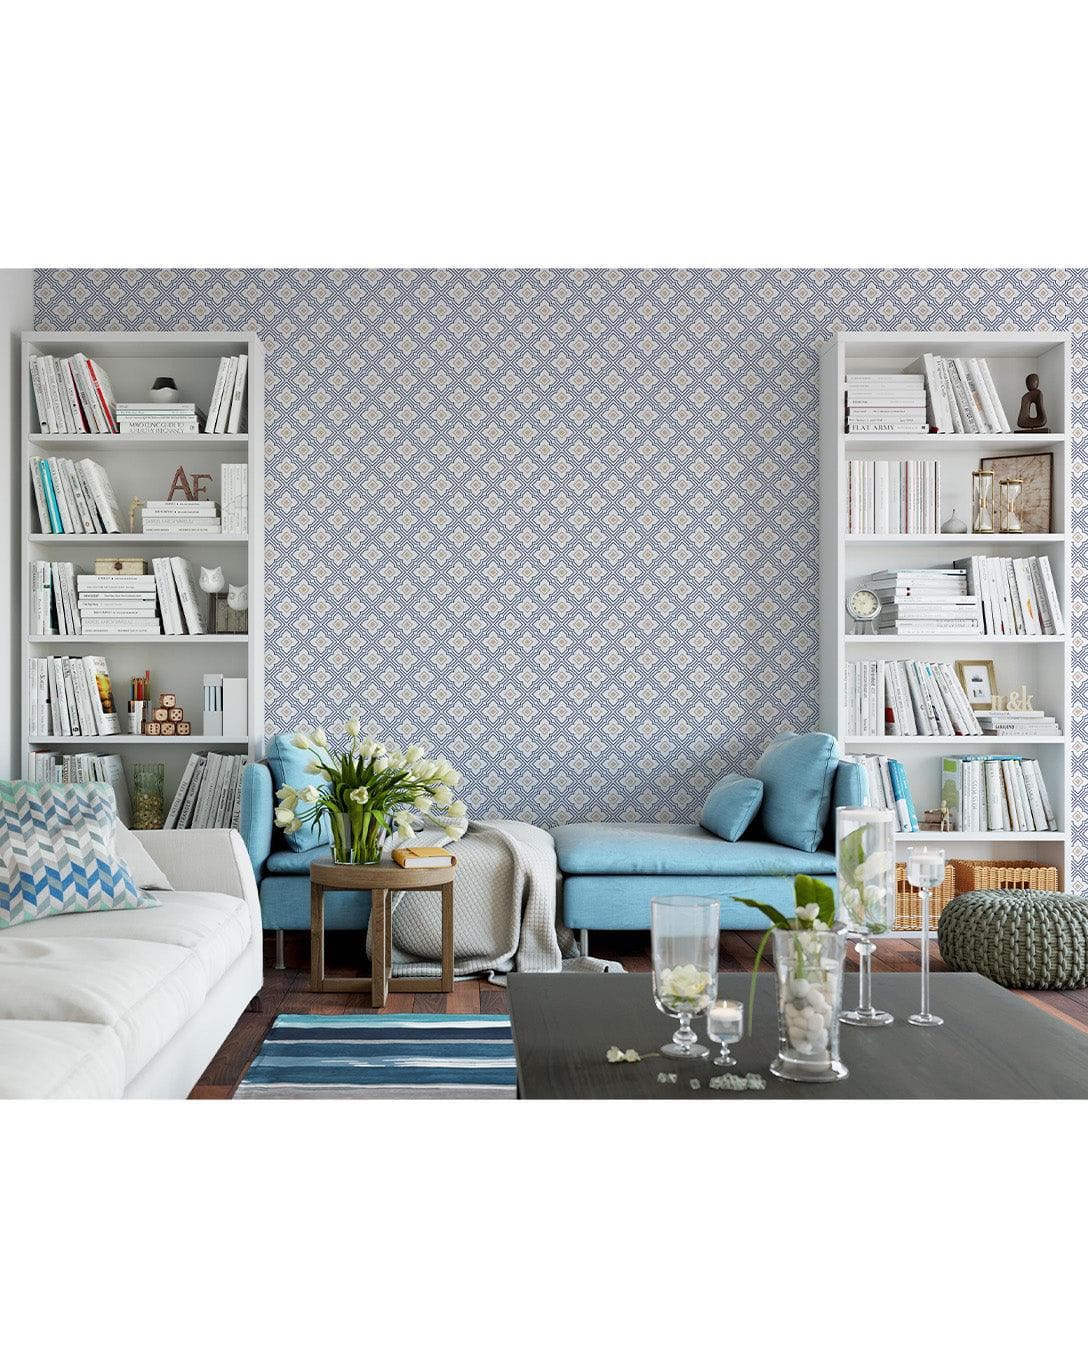 Blue and Gold Flower Tiles Removable Wallpaper 